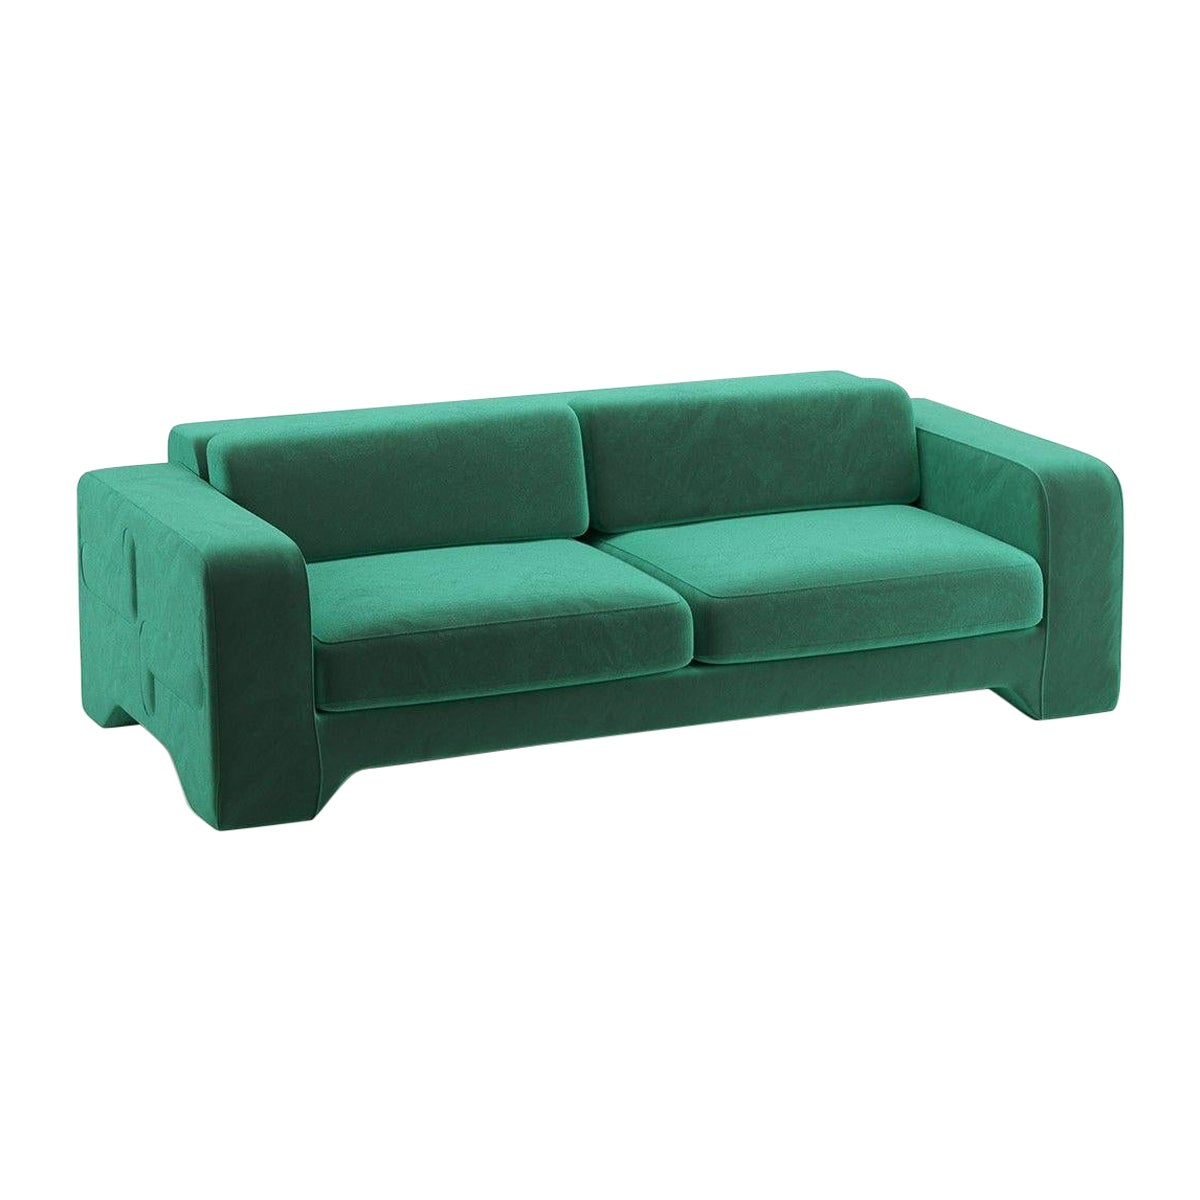 Popus Editions Giovanna 4 Seater Sofa in Green '772256' Como Velvet Upholstery For Sale